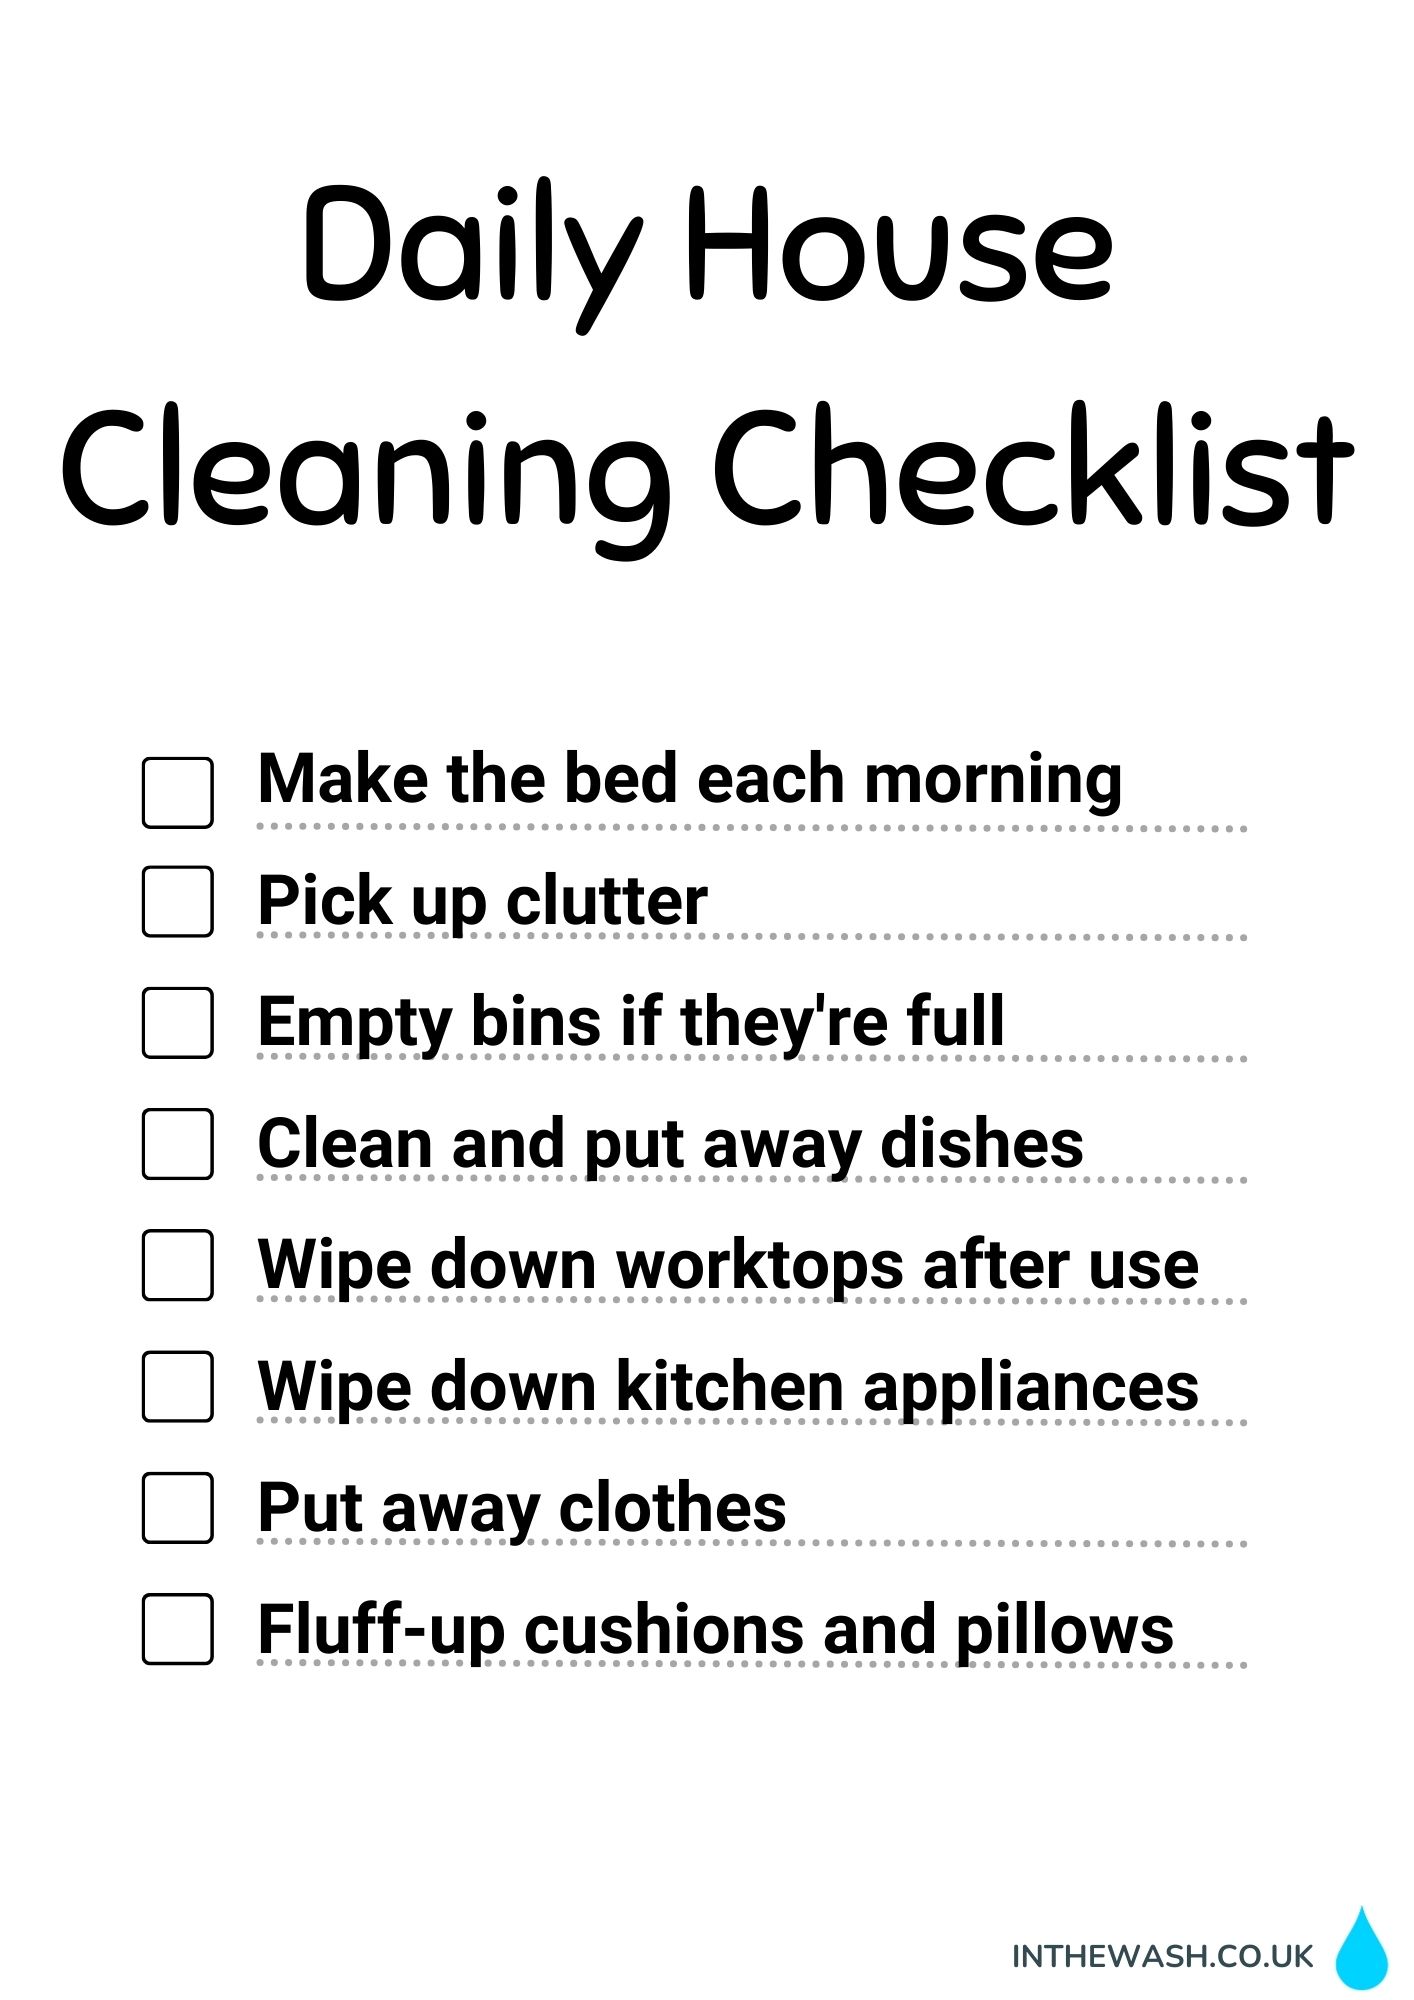 Daily house cleaning checklist